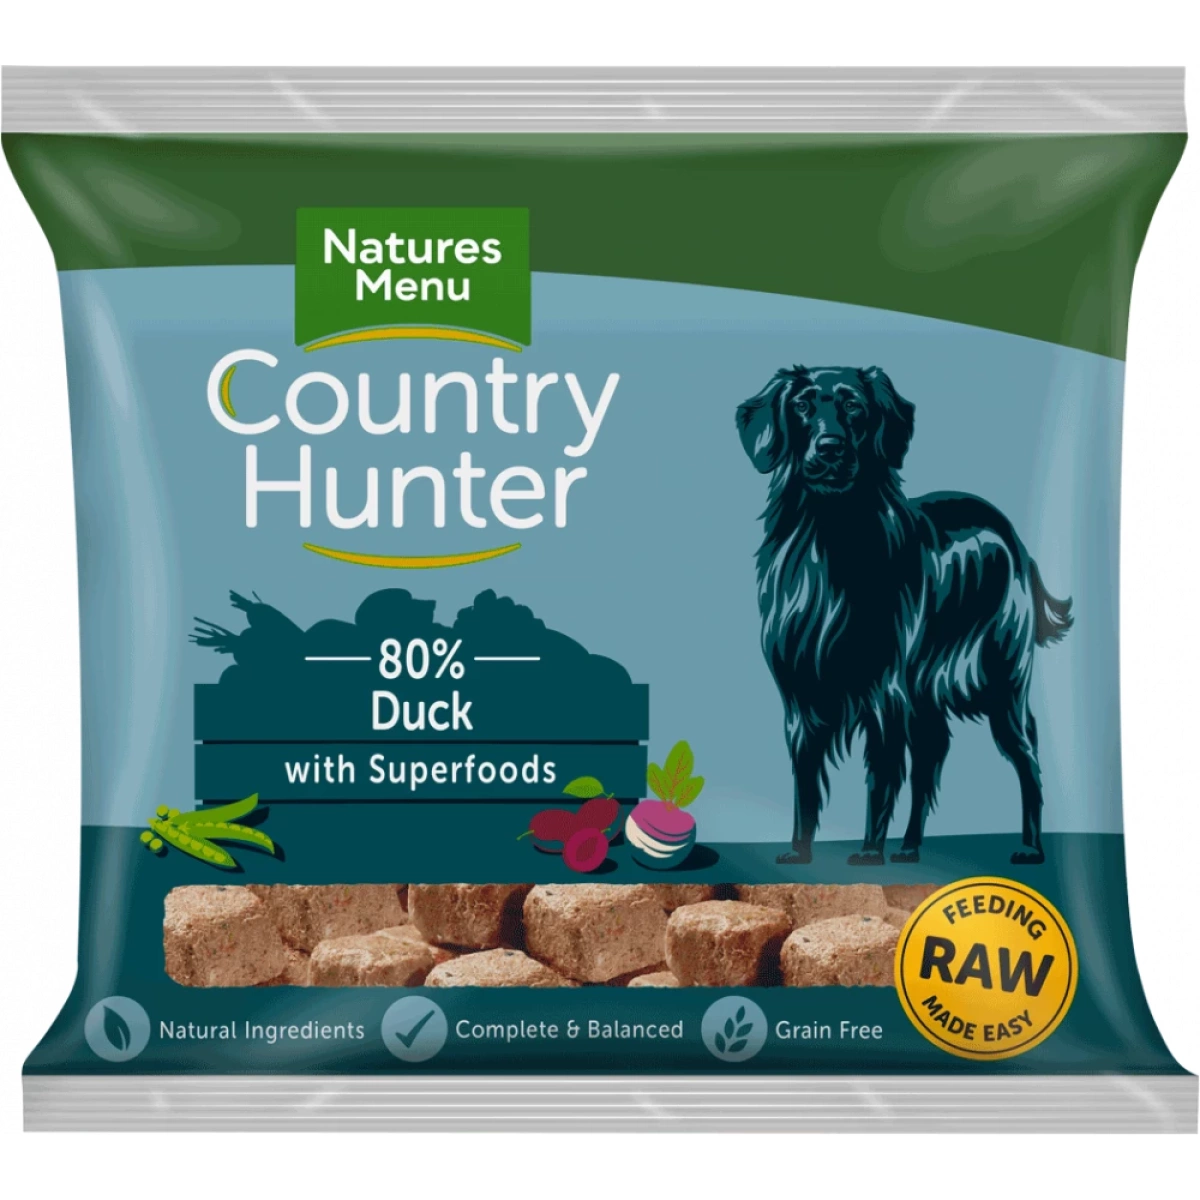 Country Hunter Nuggets 1kg - Duck Main Image